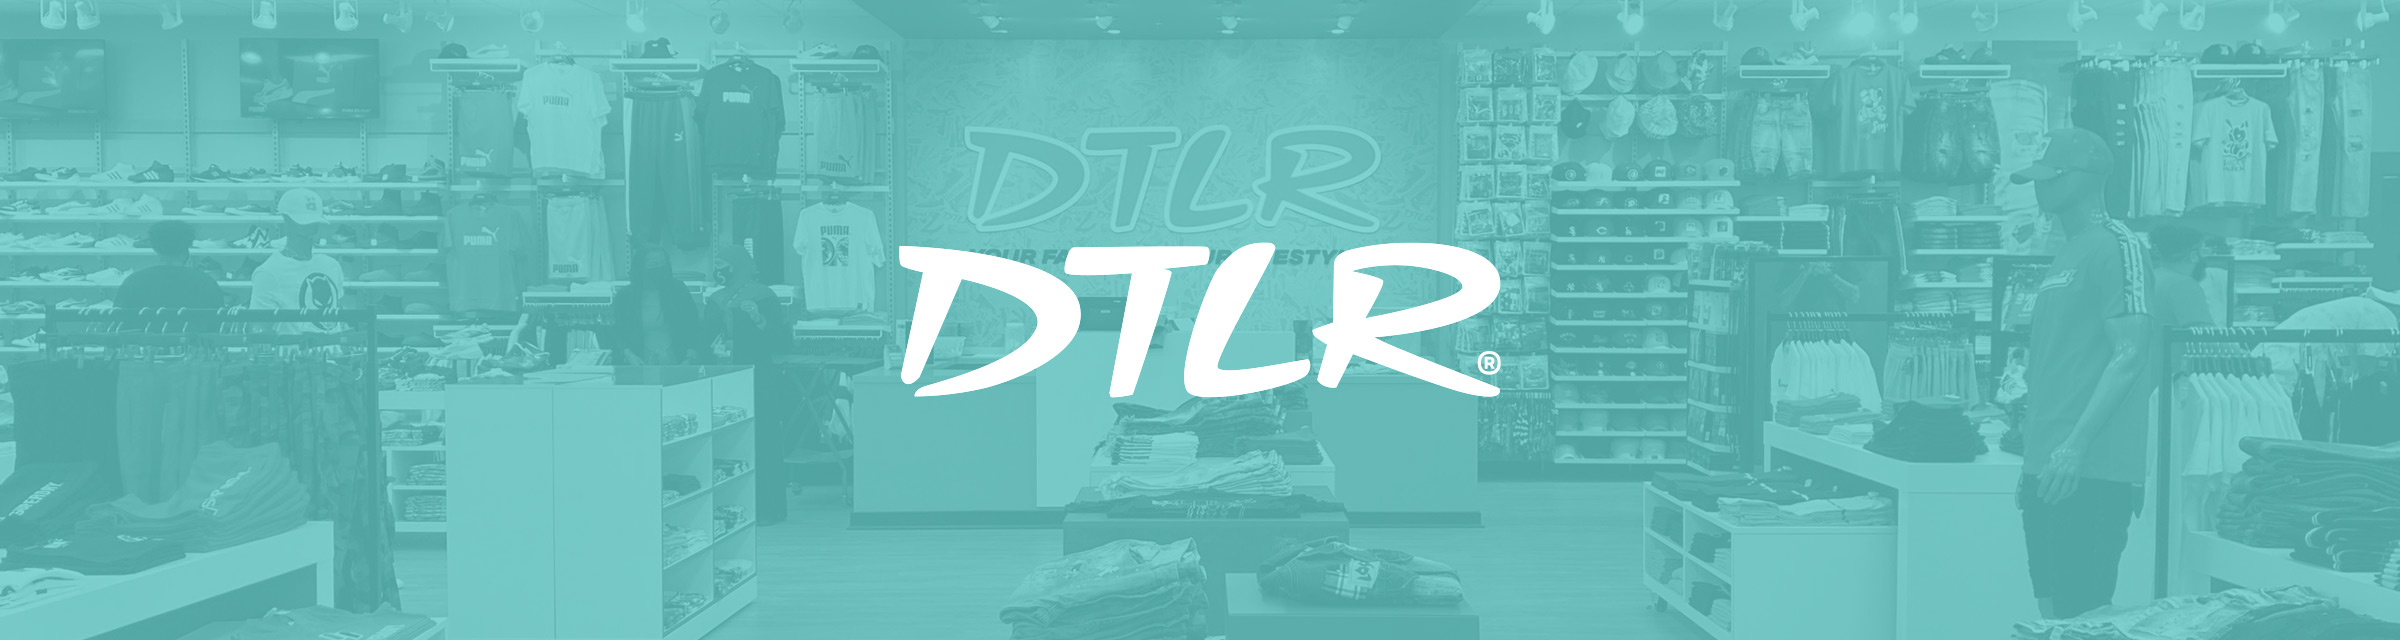 DTLR Boosts Its Store Footprint and Digital Business with Aptos Technology